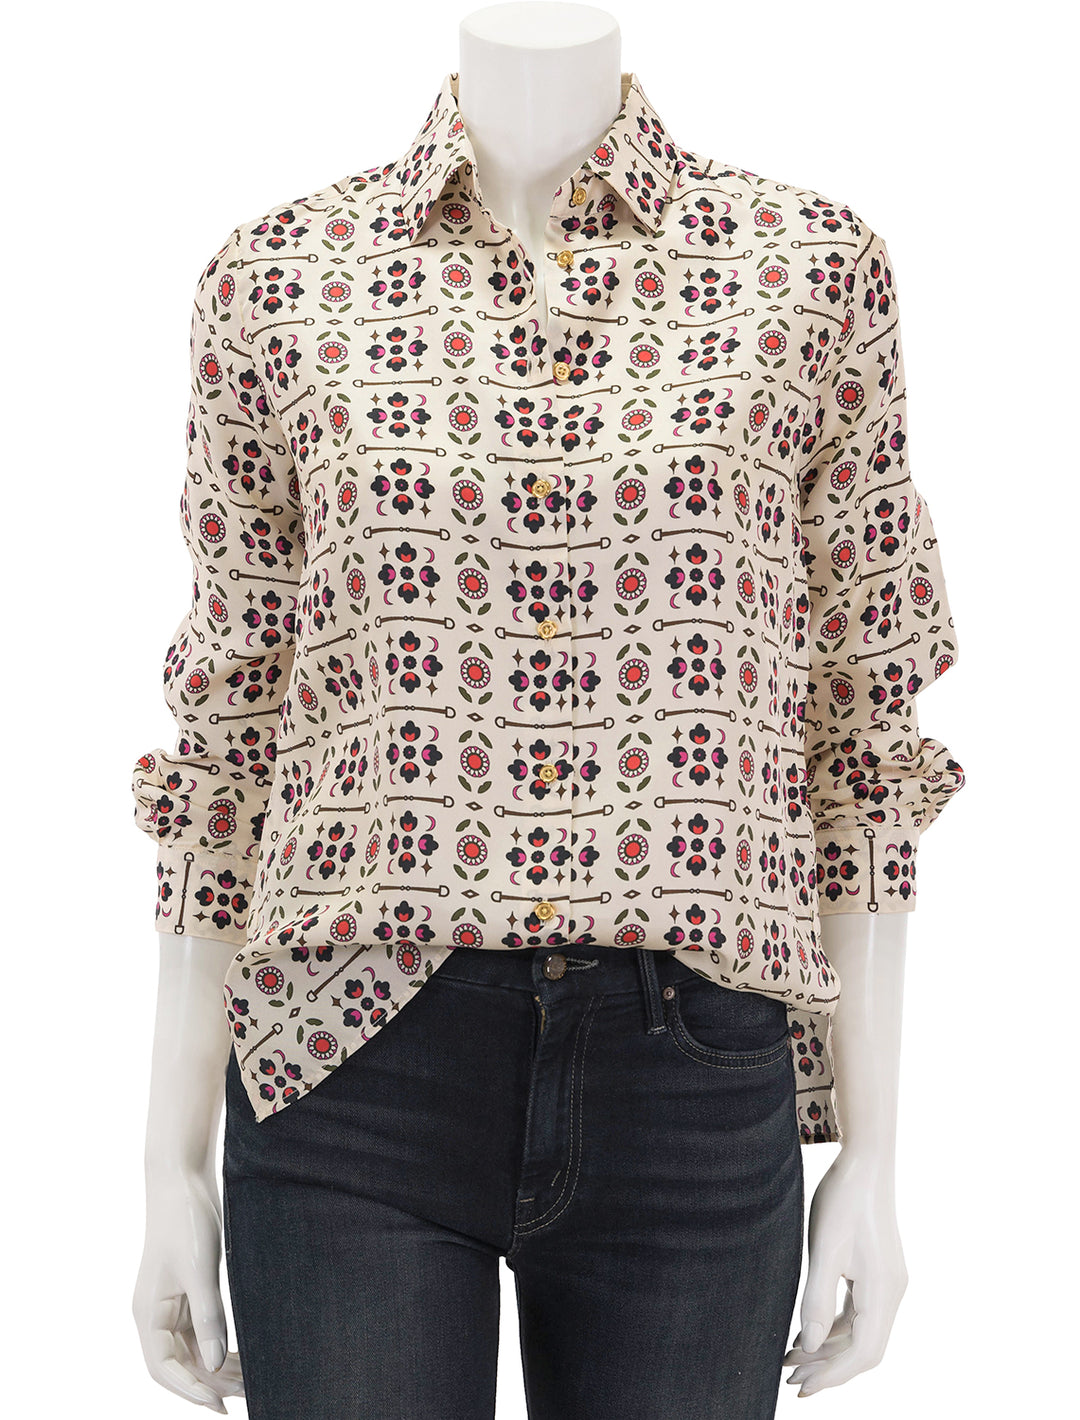 Front view of Vilagallo's camisa irina floral equestrian blouse.